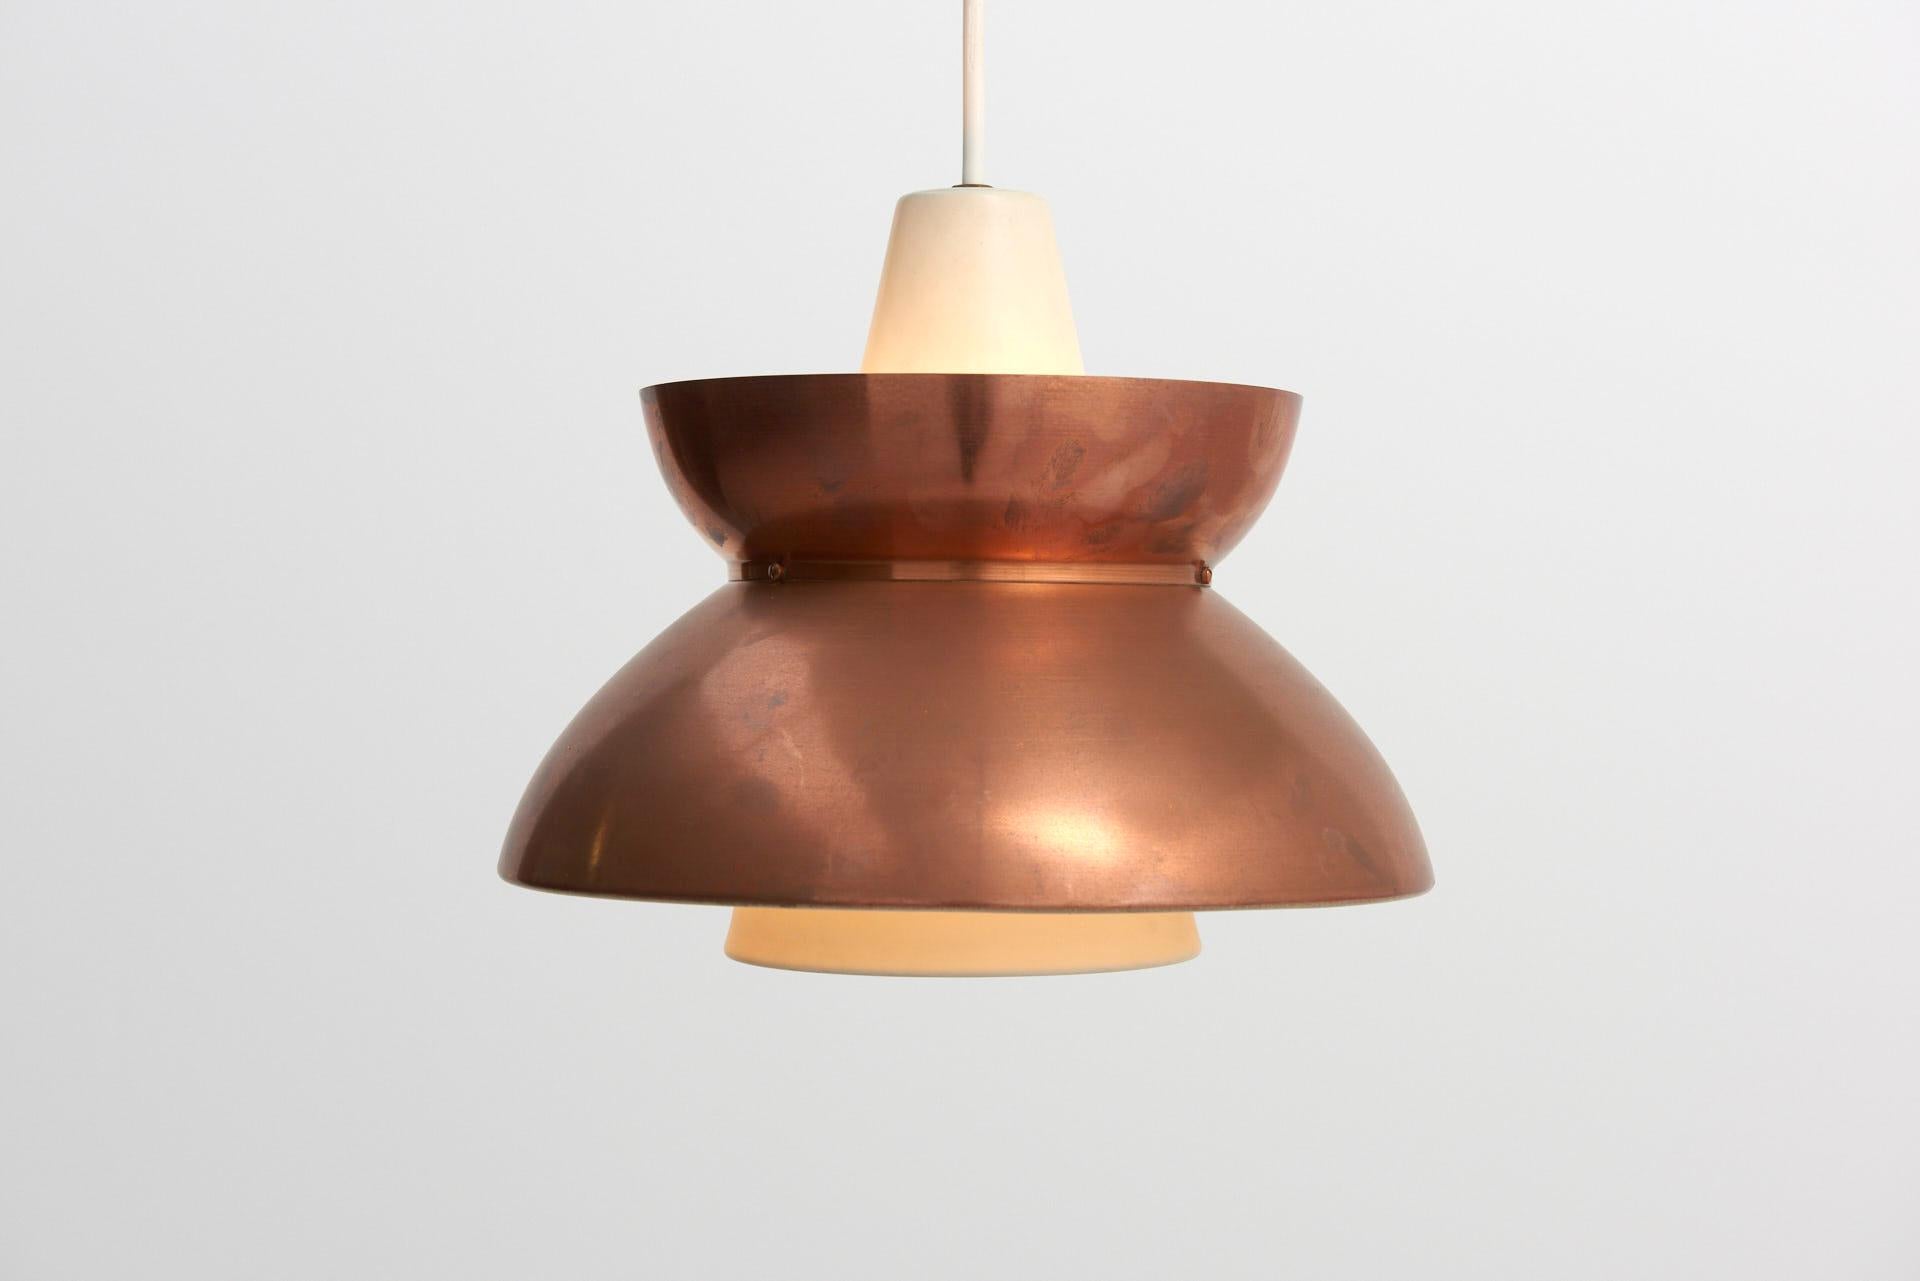 A pendant ceiling lamp designed by architect Jørn Utzon for the Navy Buildings department, 'Søværnspendel'. Patinated copper on the outside and white lacquered metal on the inside. Made in Denmark by Louis Poulsen.